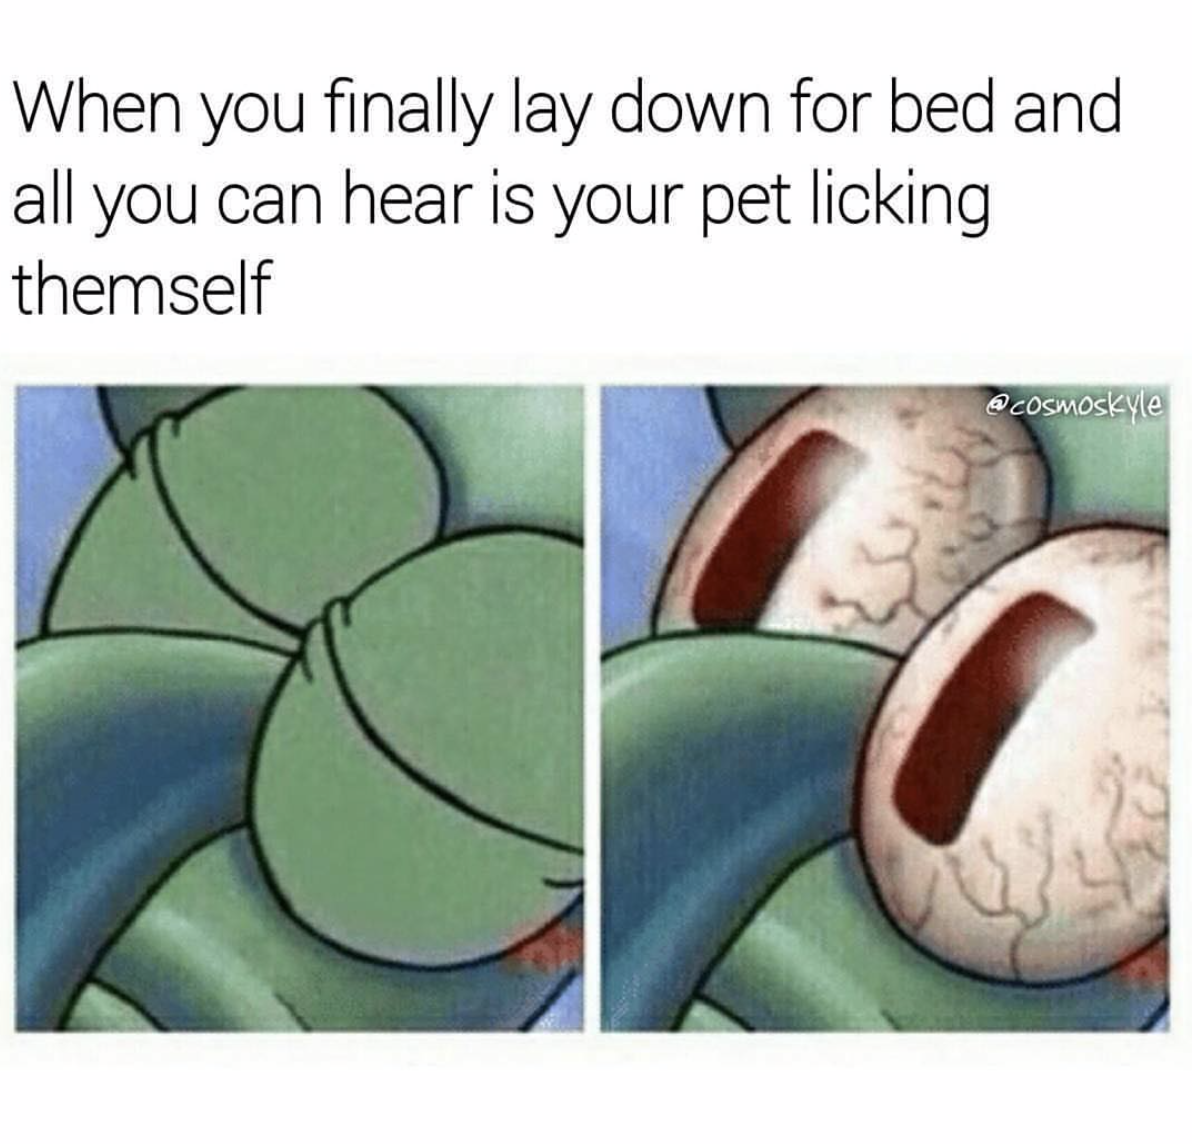 spongebob sleep meme - When you finally lay down for bed and all you can hear is your pet licking themself cosmoskyle